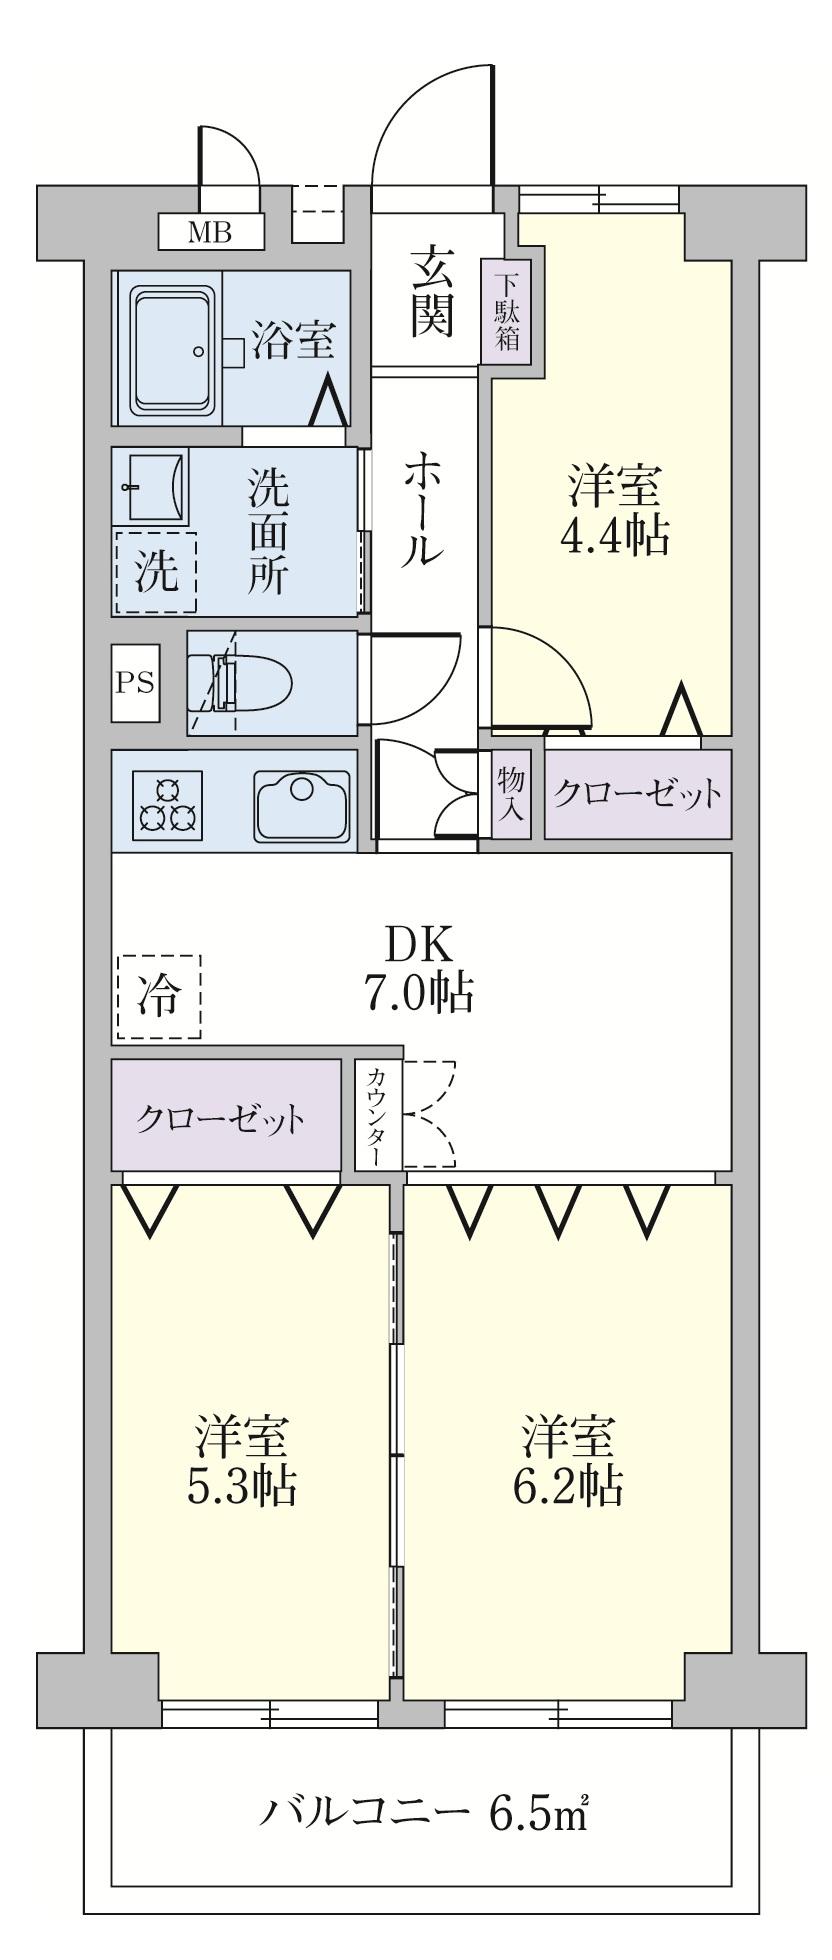 Floor plan. 3DK, Price 19,800,000 yen, Occupied area 54.65 sq m , According to the balcony area 6.5 sq m family configuration, You can use it as 2LDK of 3DK or spread.